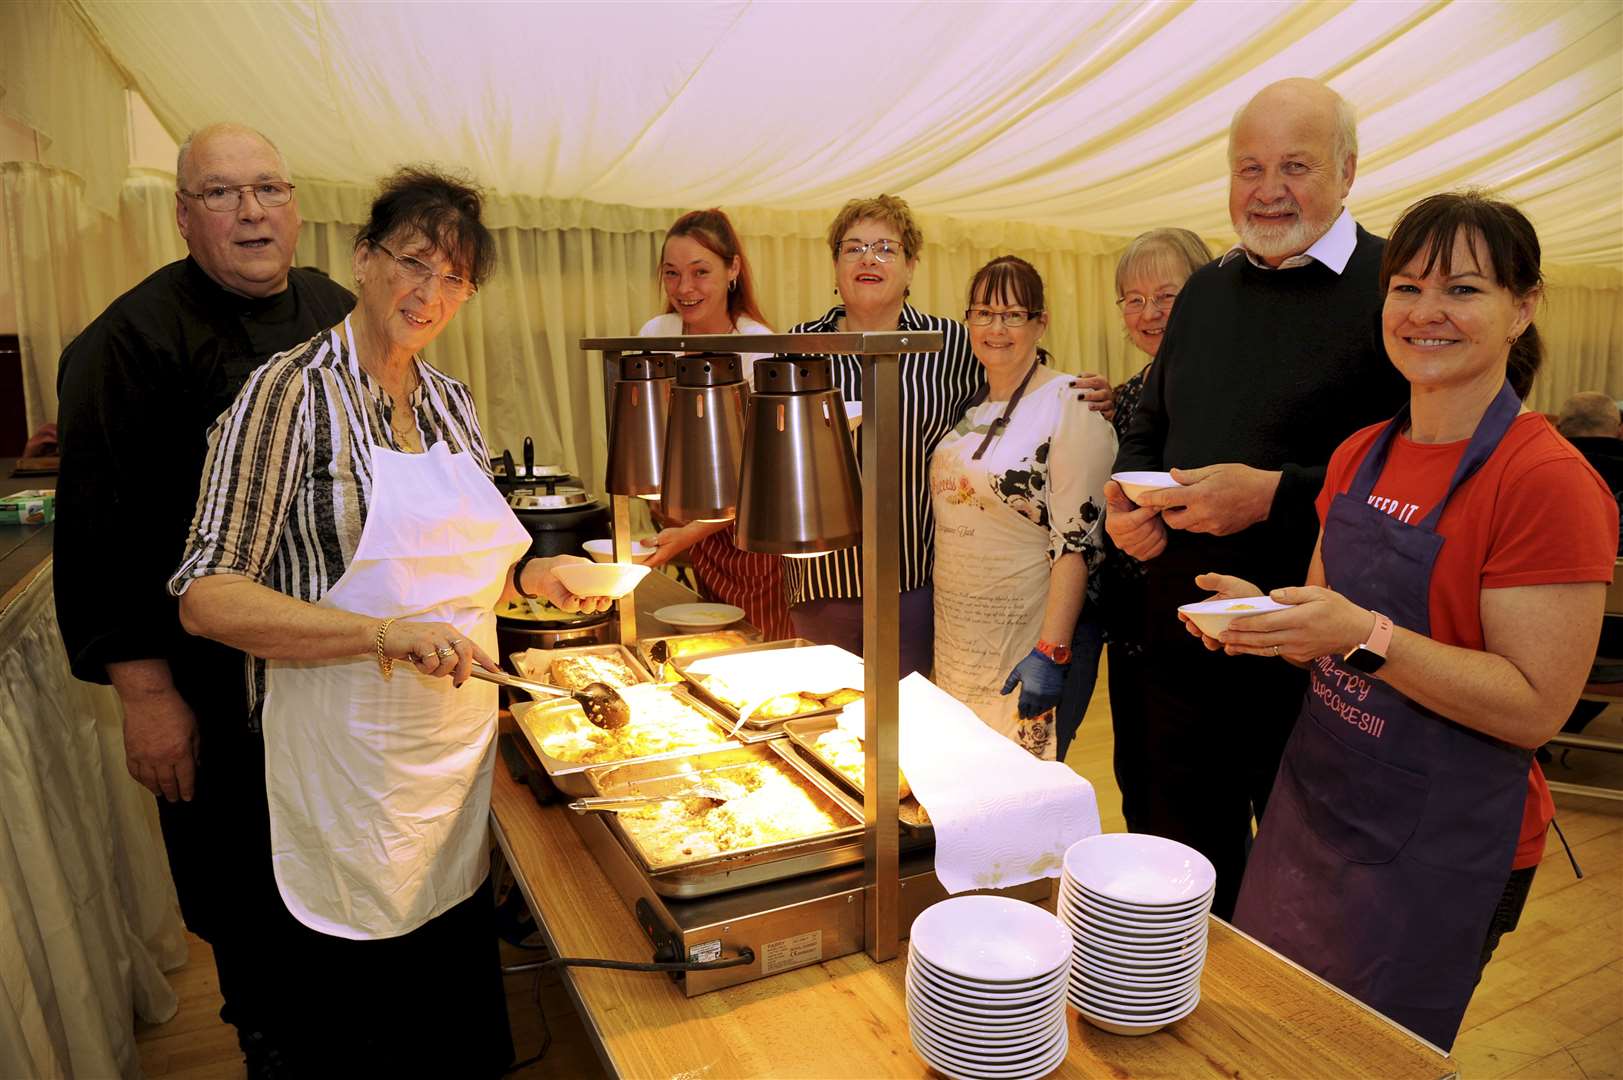 The volunteer team at Buckie community lunches are waiting to provide a warm welcome. Picture: Eric Cormack